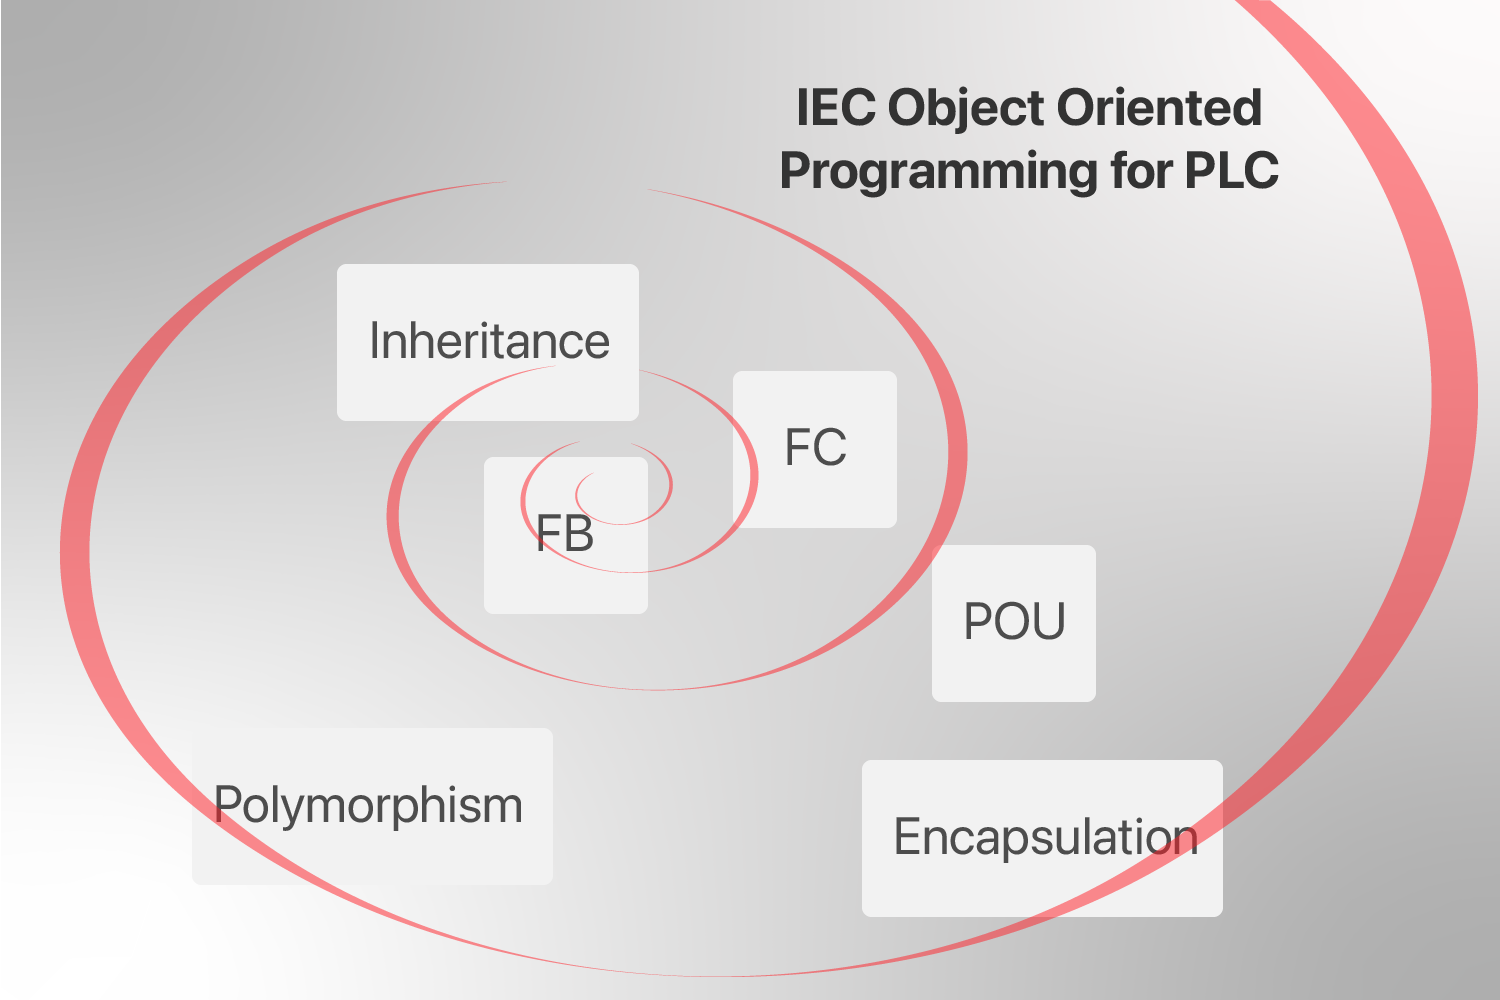 PLC Object Oriented Programming, HOW?